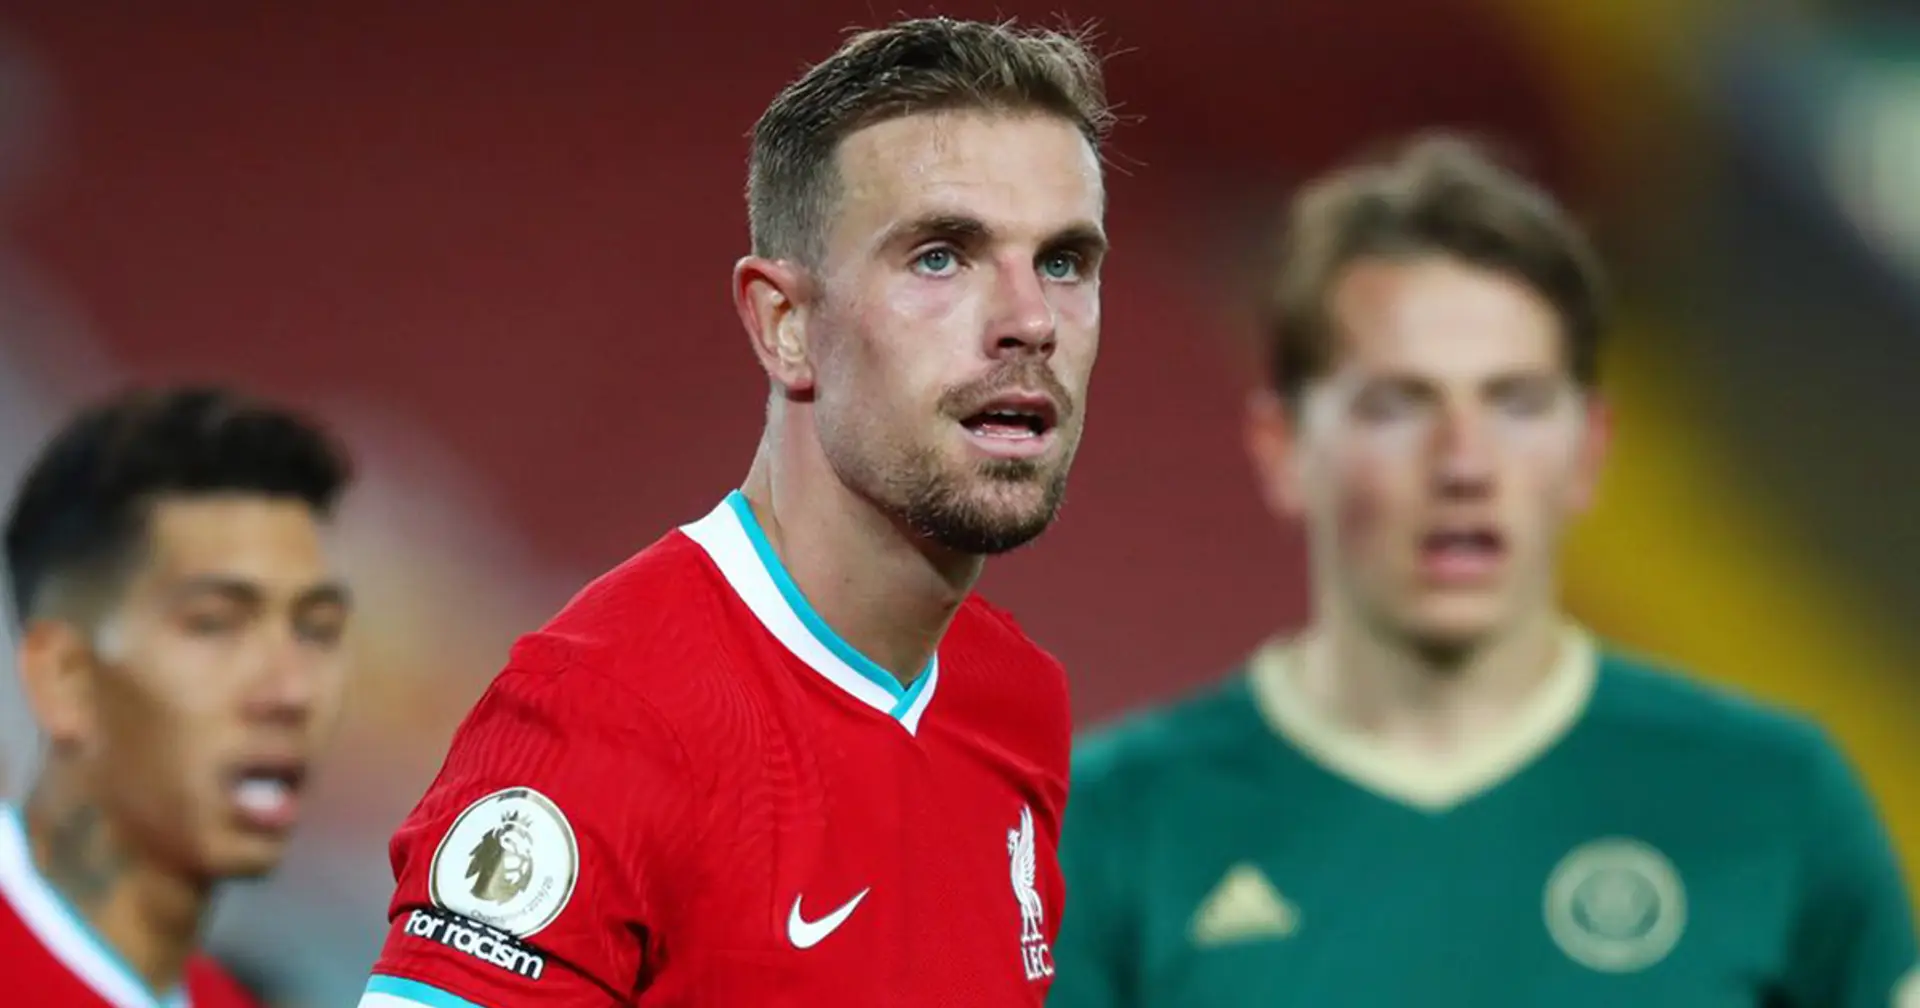 Jordan Henderson: 'I am only interested in the mentality in our changing room and I see hunger, resilience, character'